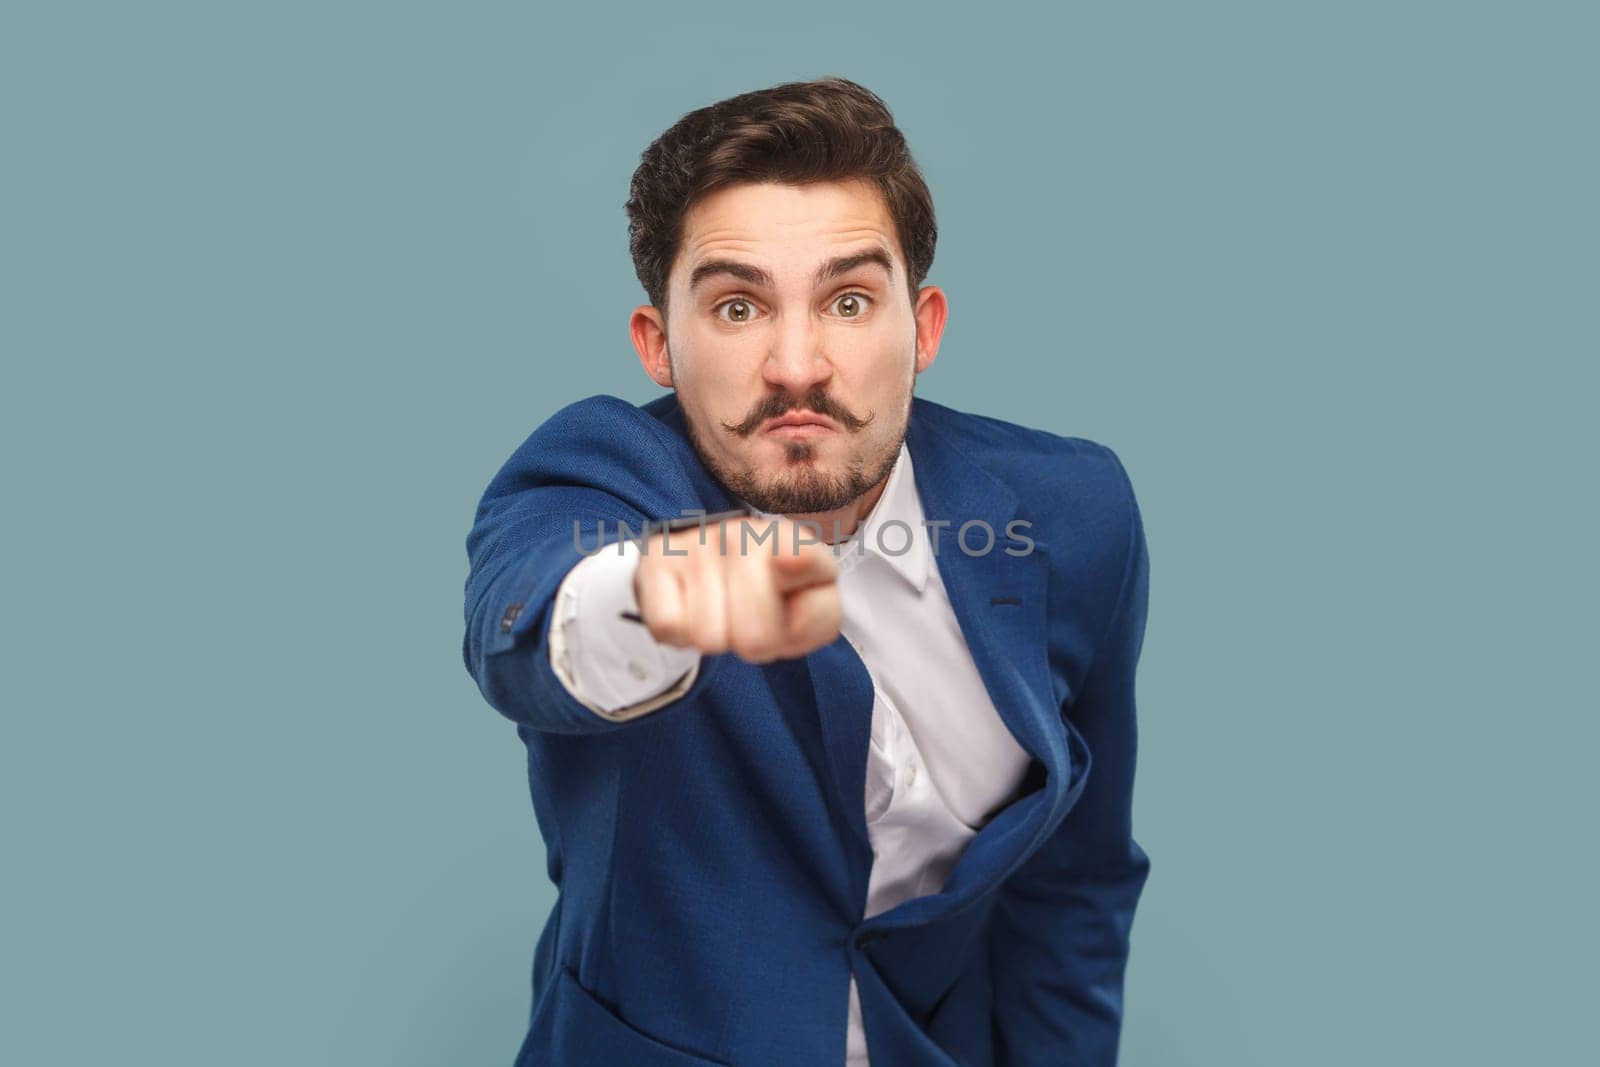 Portrait of serious man with mustache with negative facial expression pointing finger to camera, selecting you, wearing official style suit. Indoor studio shot isolated on light blue background.